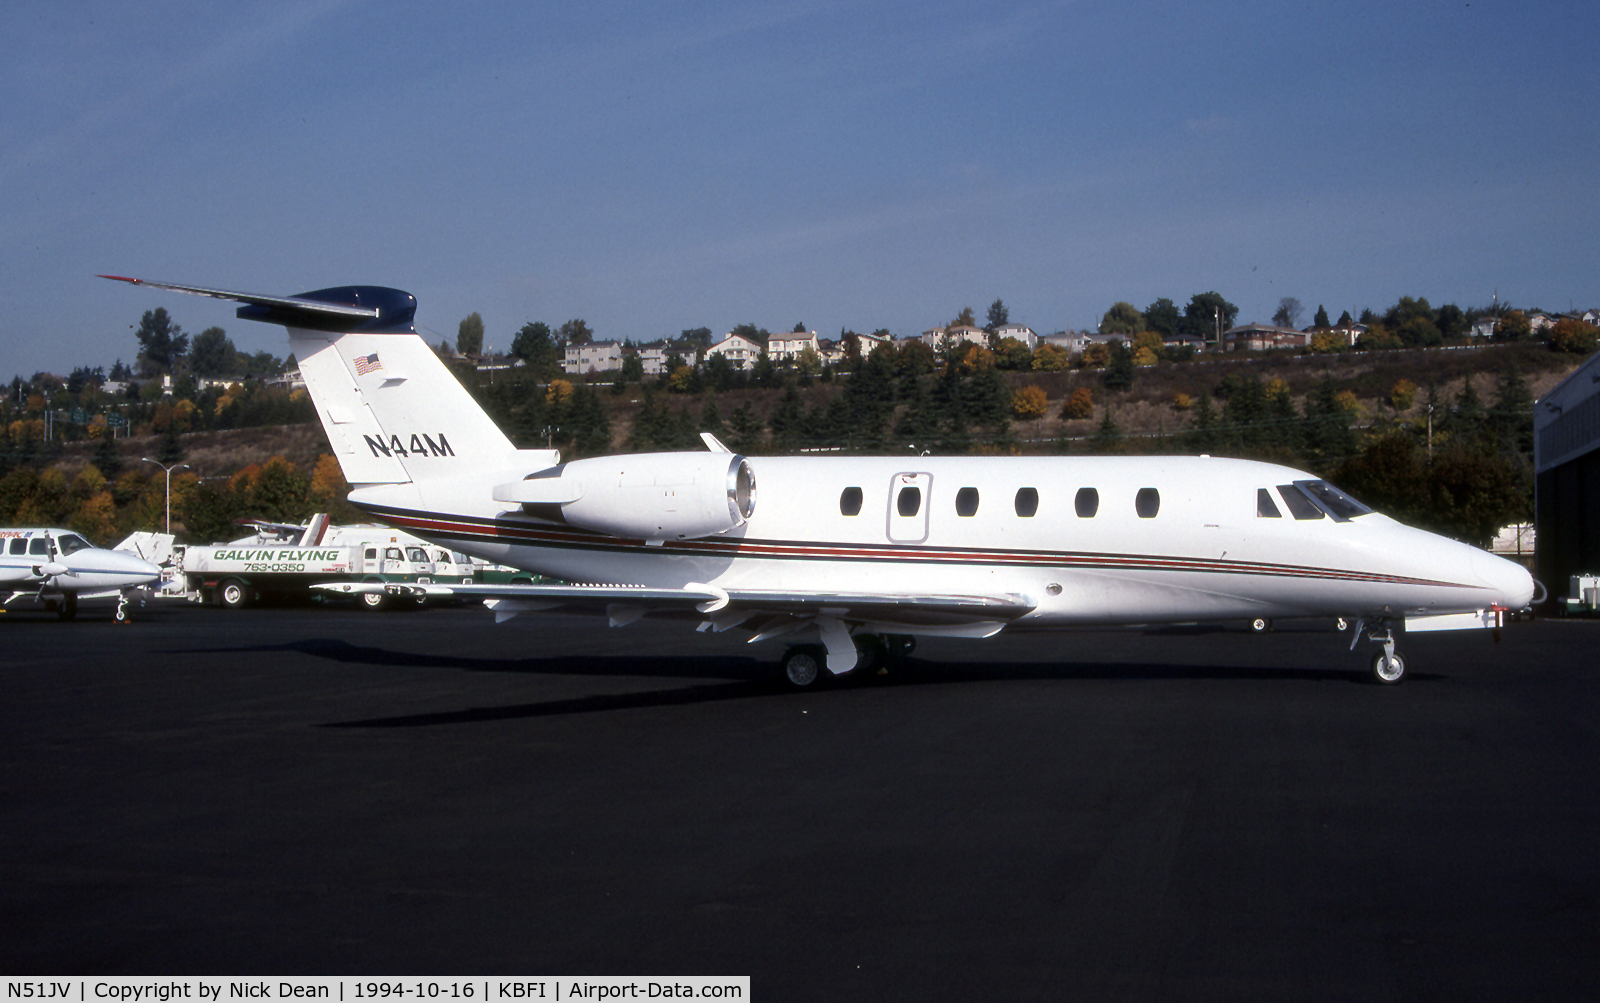 N51JV, 1984 Cessna 650 Citation III C/N 650-0050, KBFI (Seen here as N44M this airframe is currently registered N51JV as posted)